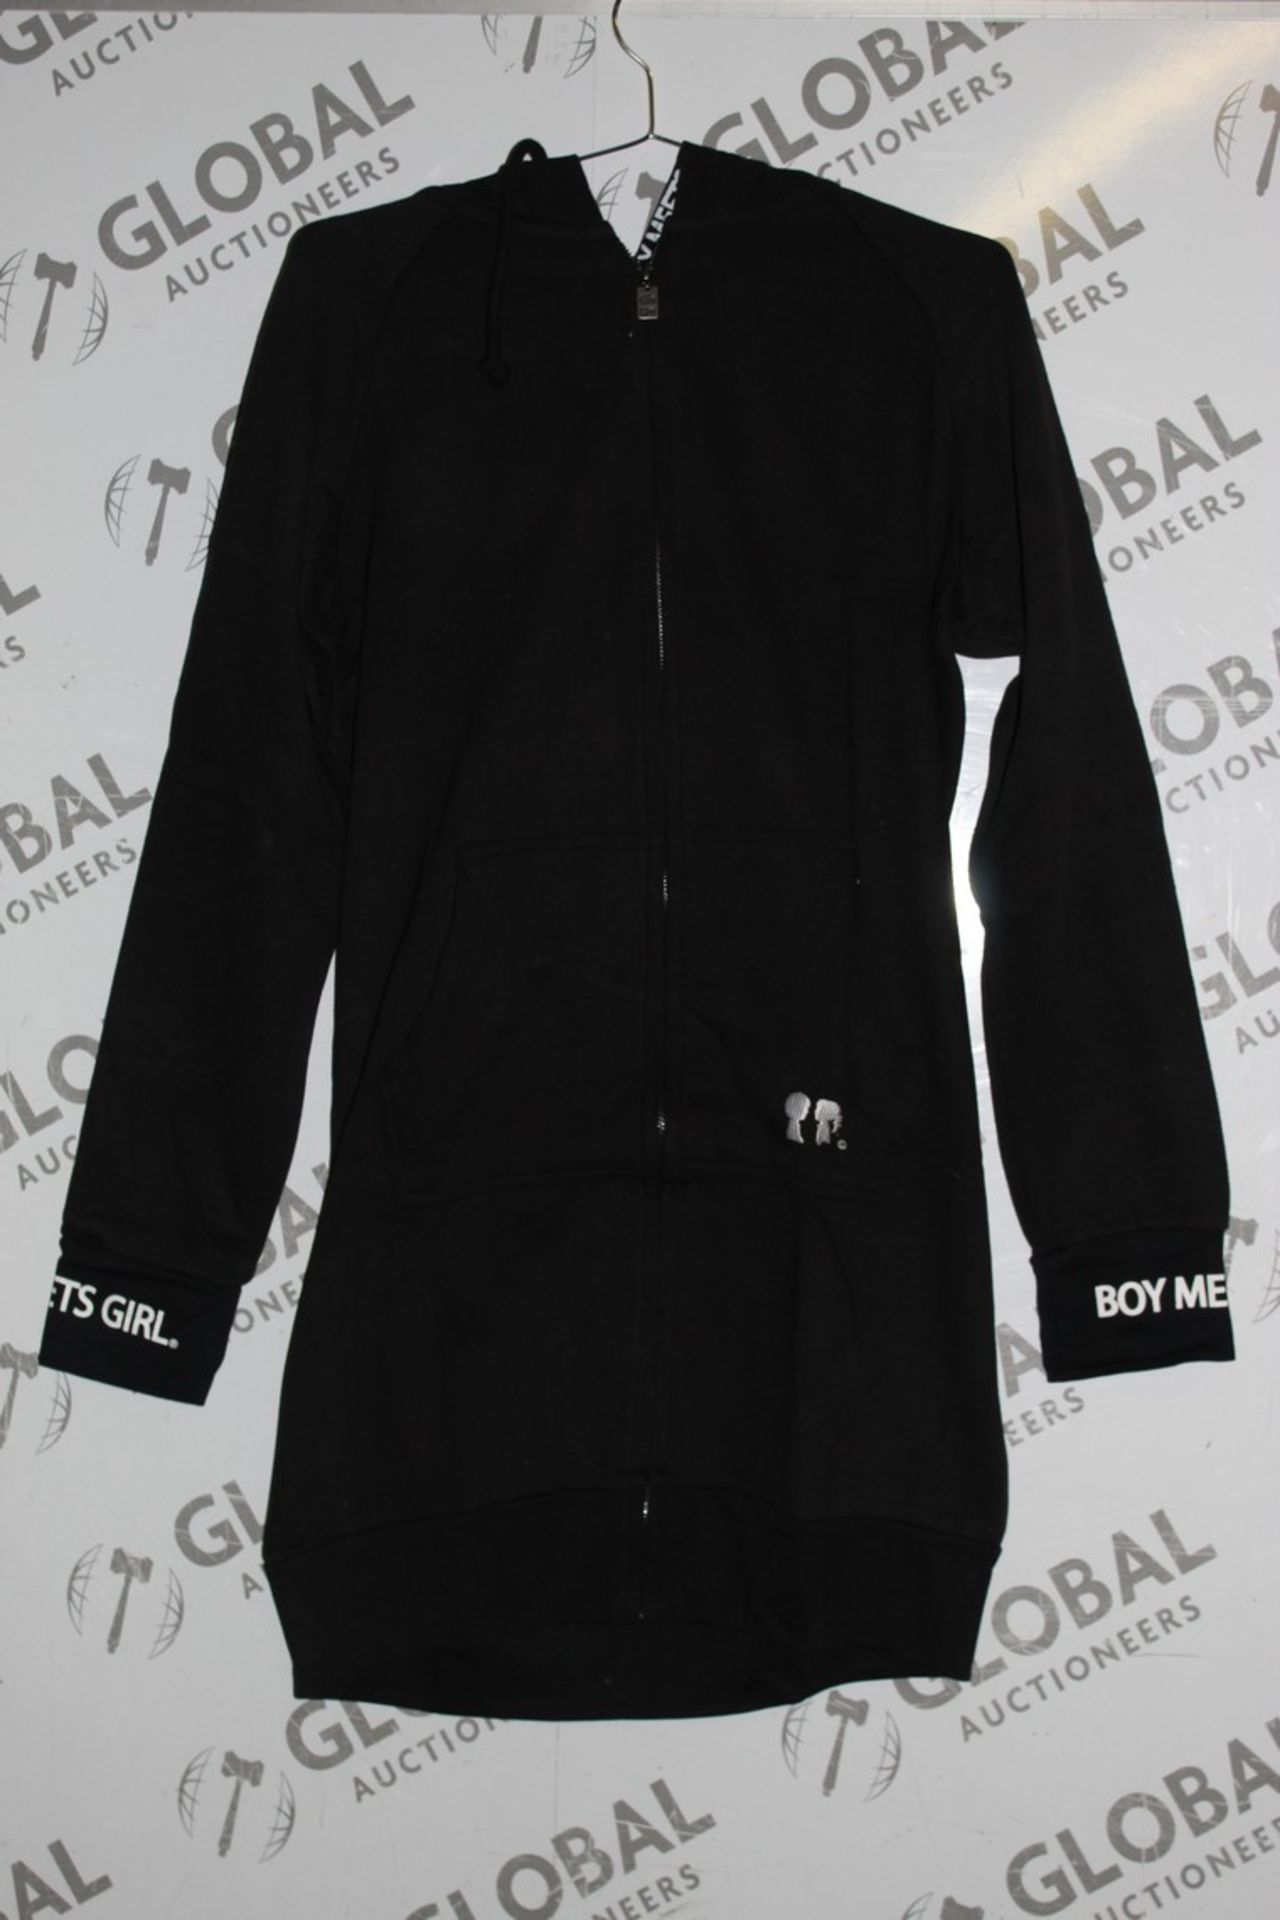 Lot to Contain 20 Brand New Boy Meets Girl Oversized Hooded Jackets in Assorted Sizes RRP £22.99